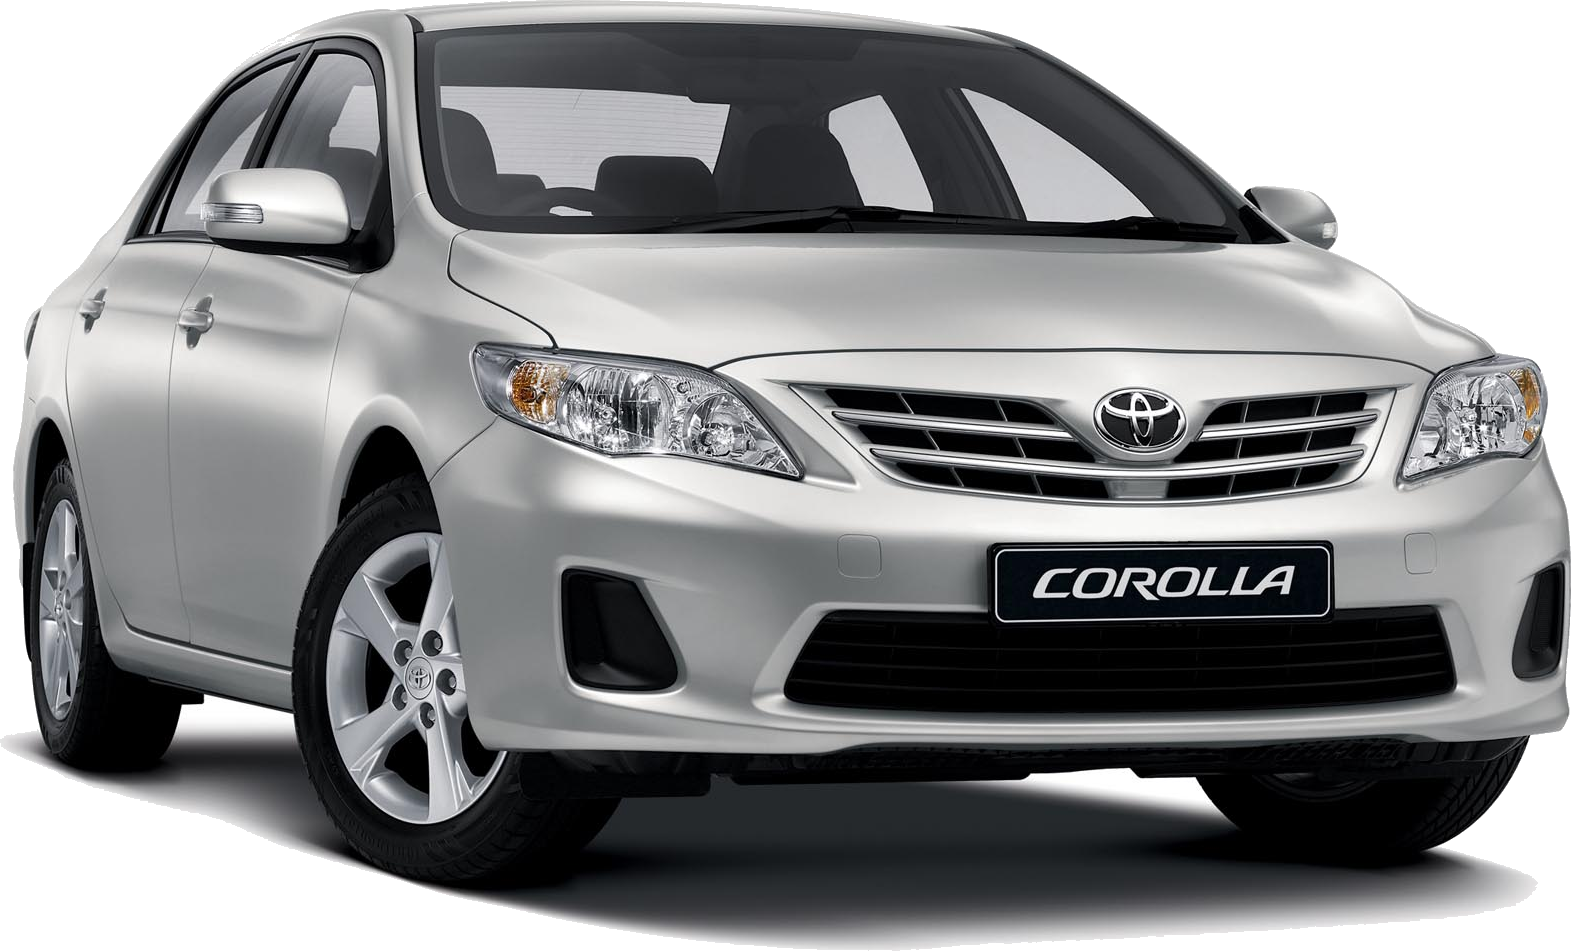 Car 2017 Corolla Toyota Family Download Free Image PNG Image